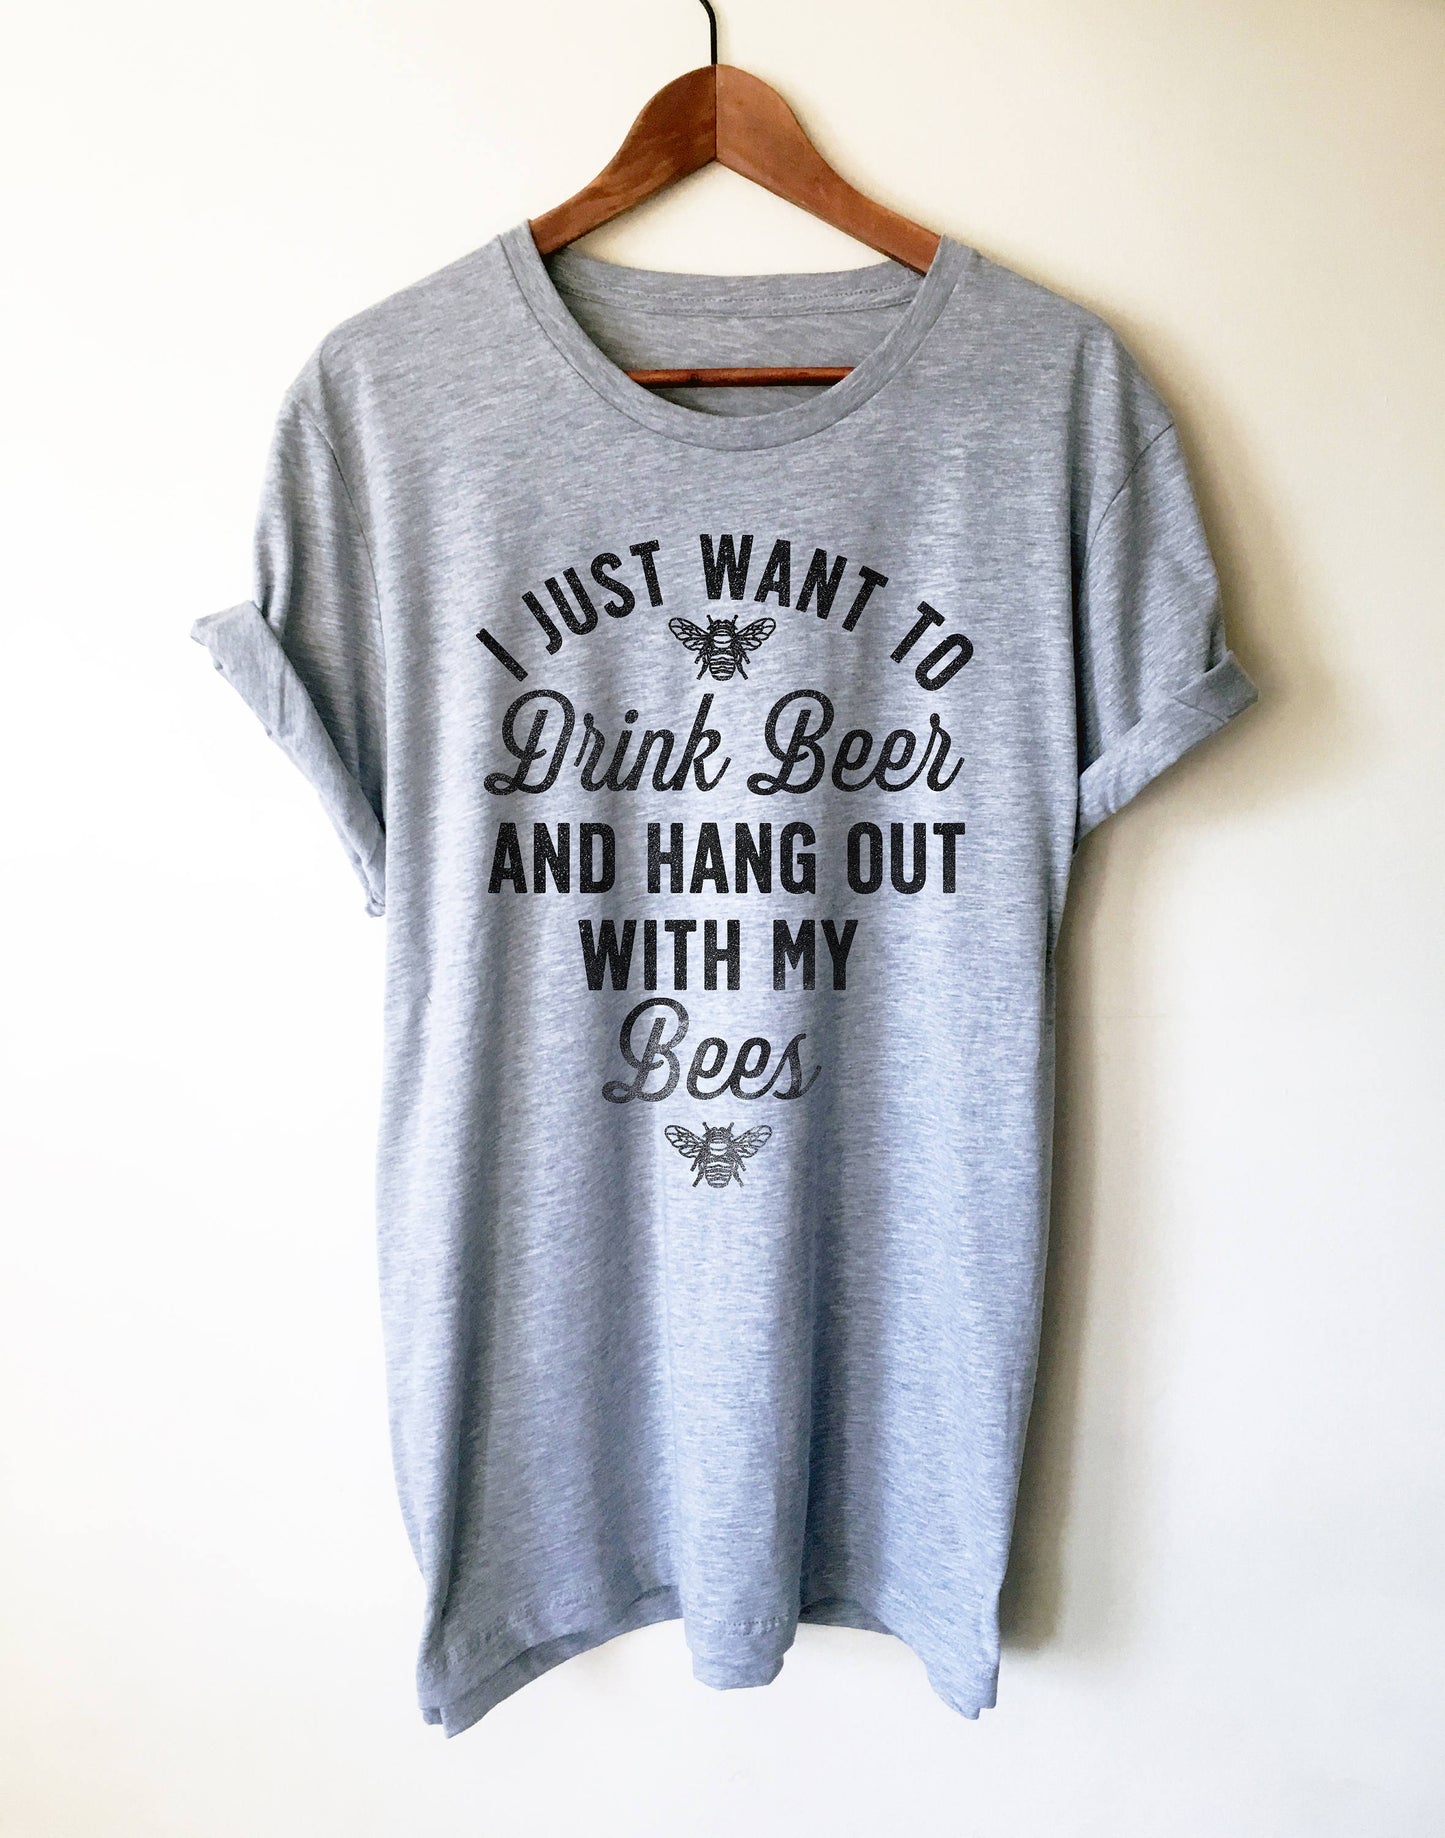 Hang Out With My Bees Unisex Shirt - Beekeeper shirt, Beekeeper gift, Honeybee, Bee lovers gifts, Beer shirt, Gift for beekeeper, Bee shirt